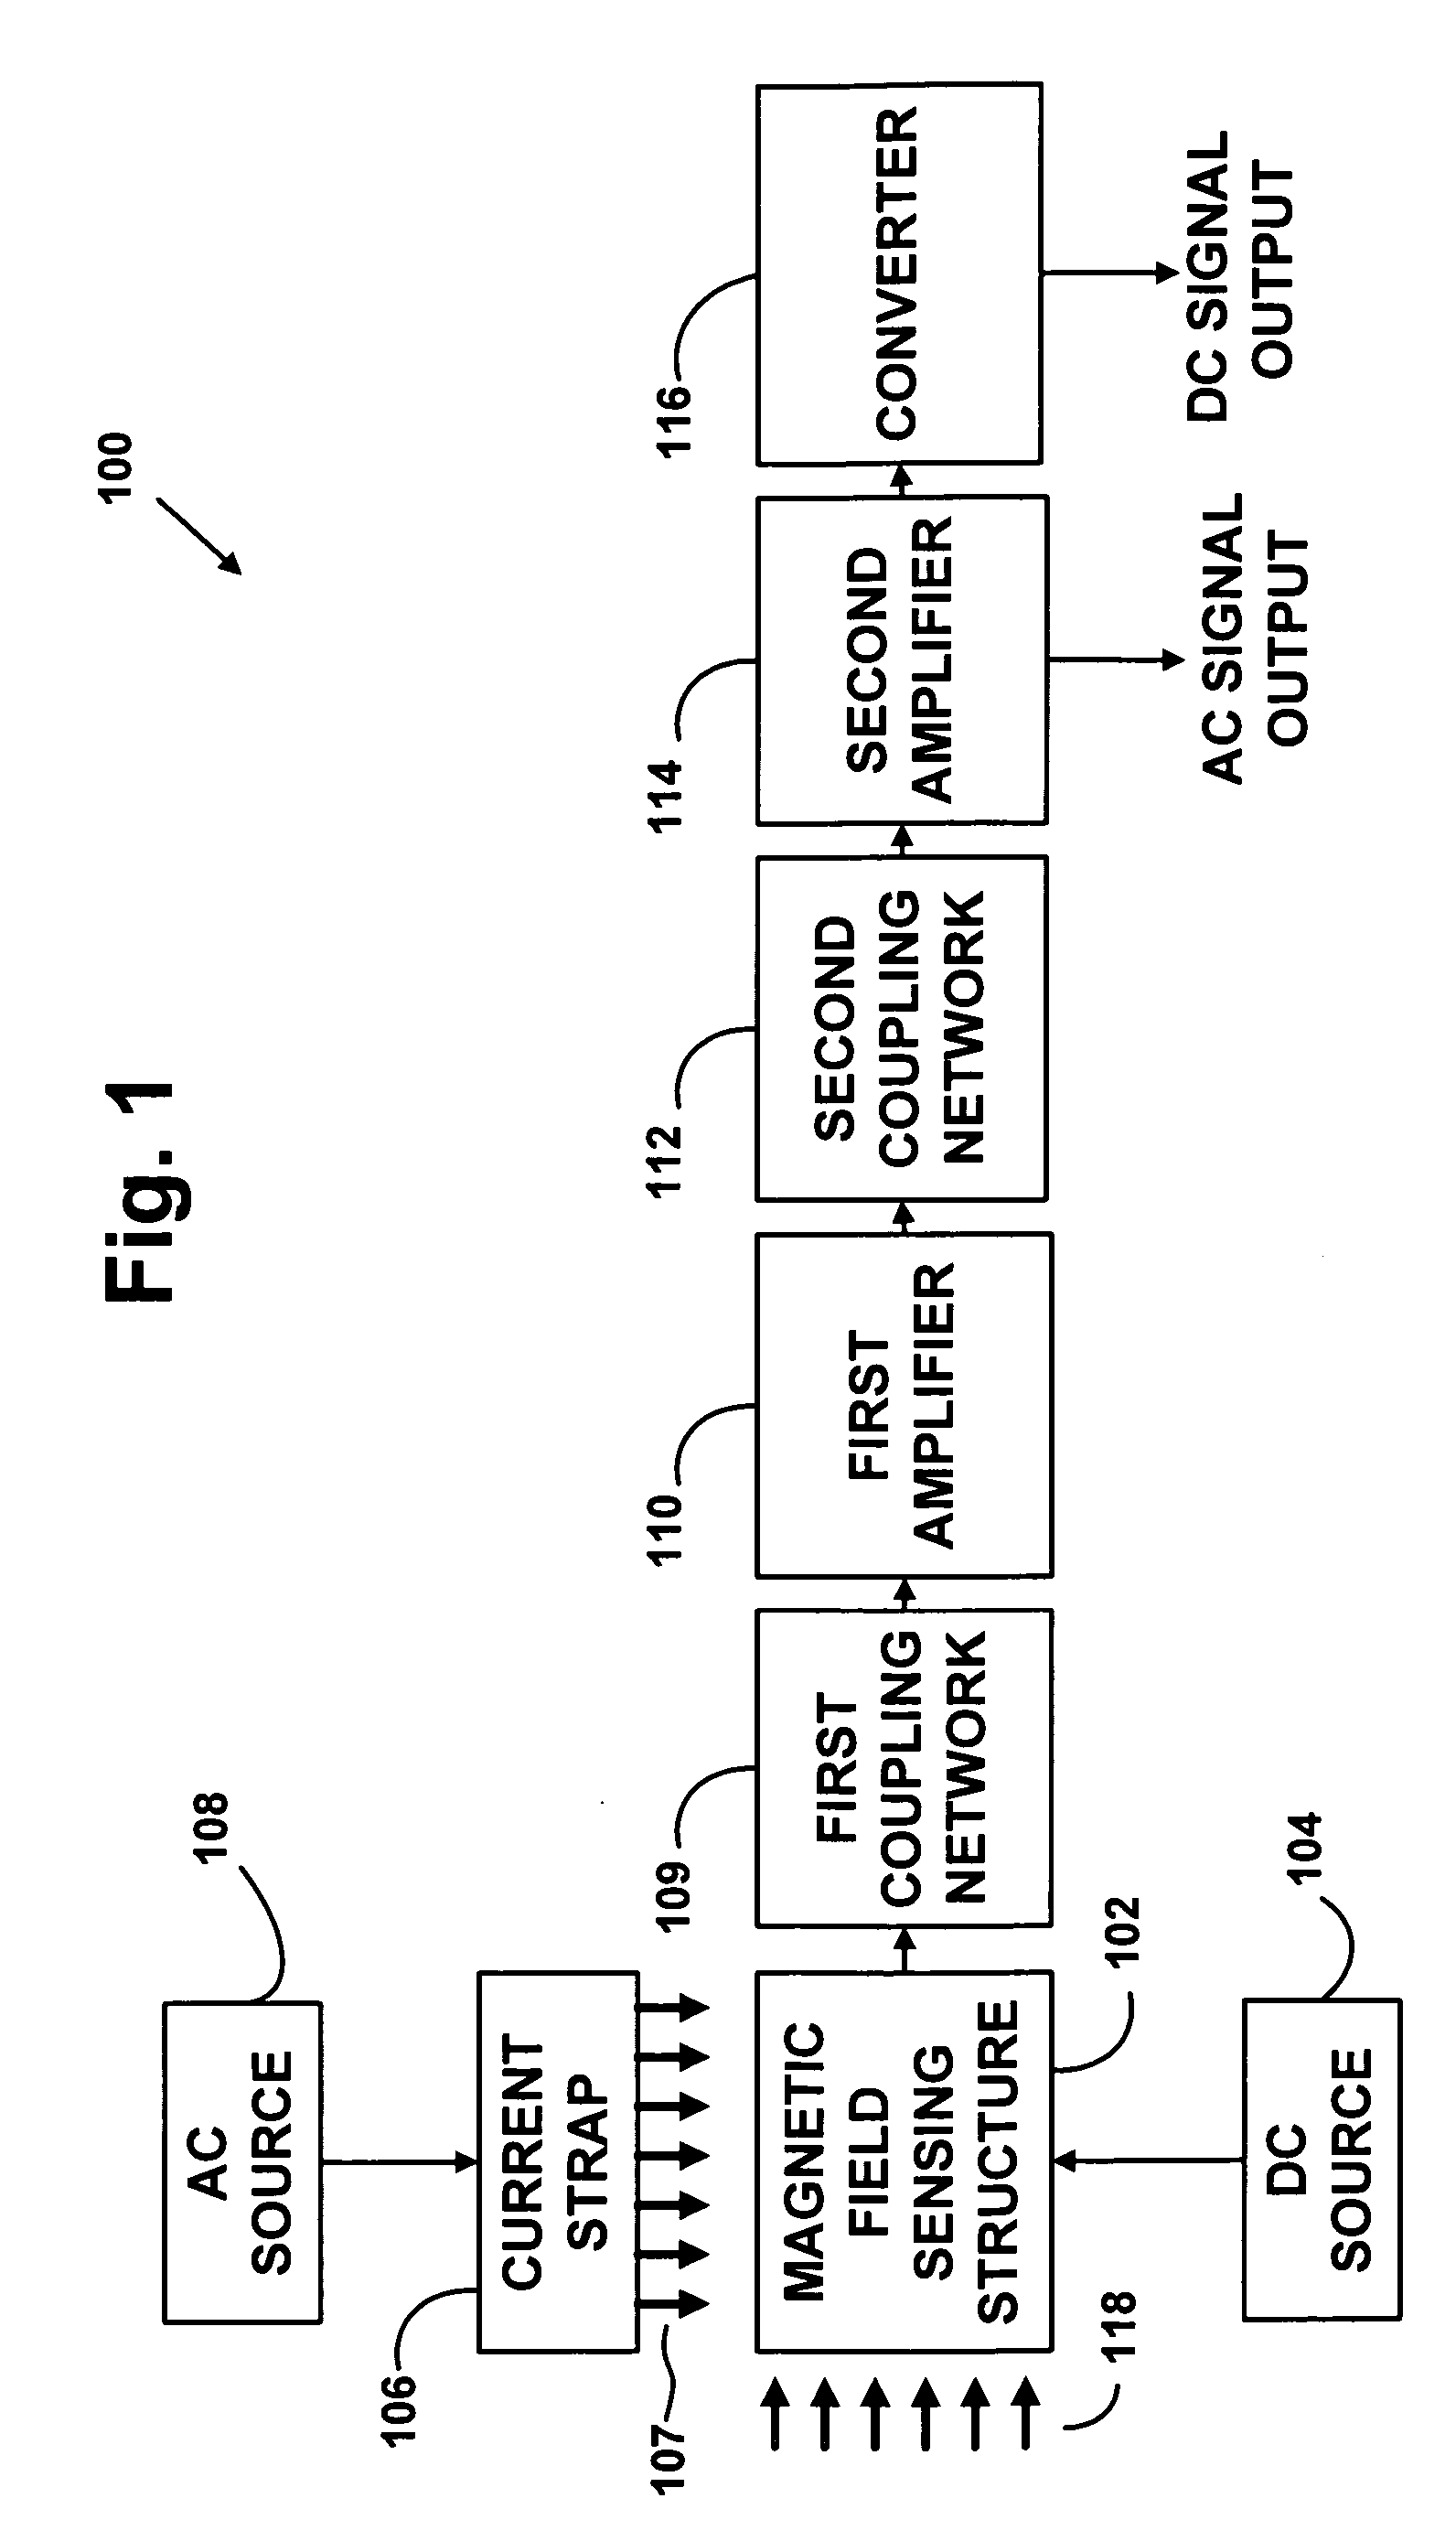 High resolution and low power magnetometer using magnetoresistive sensors